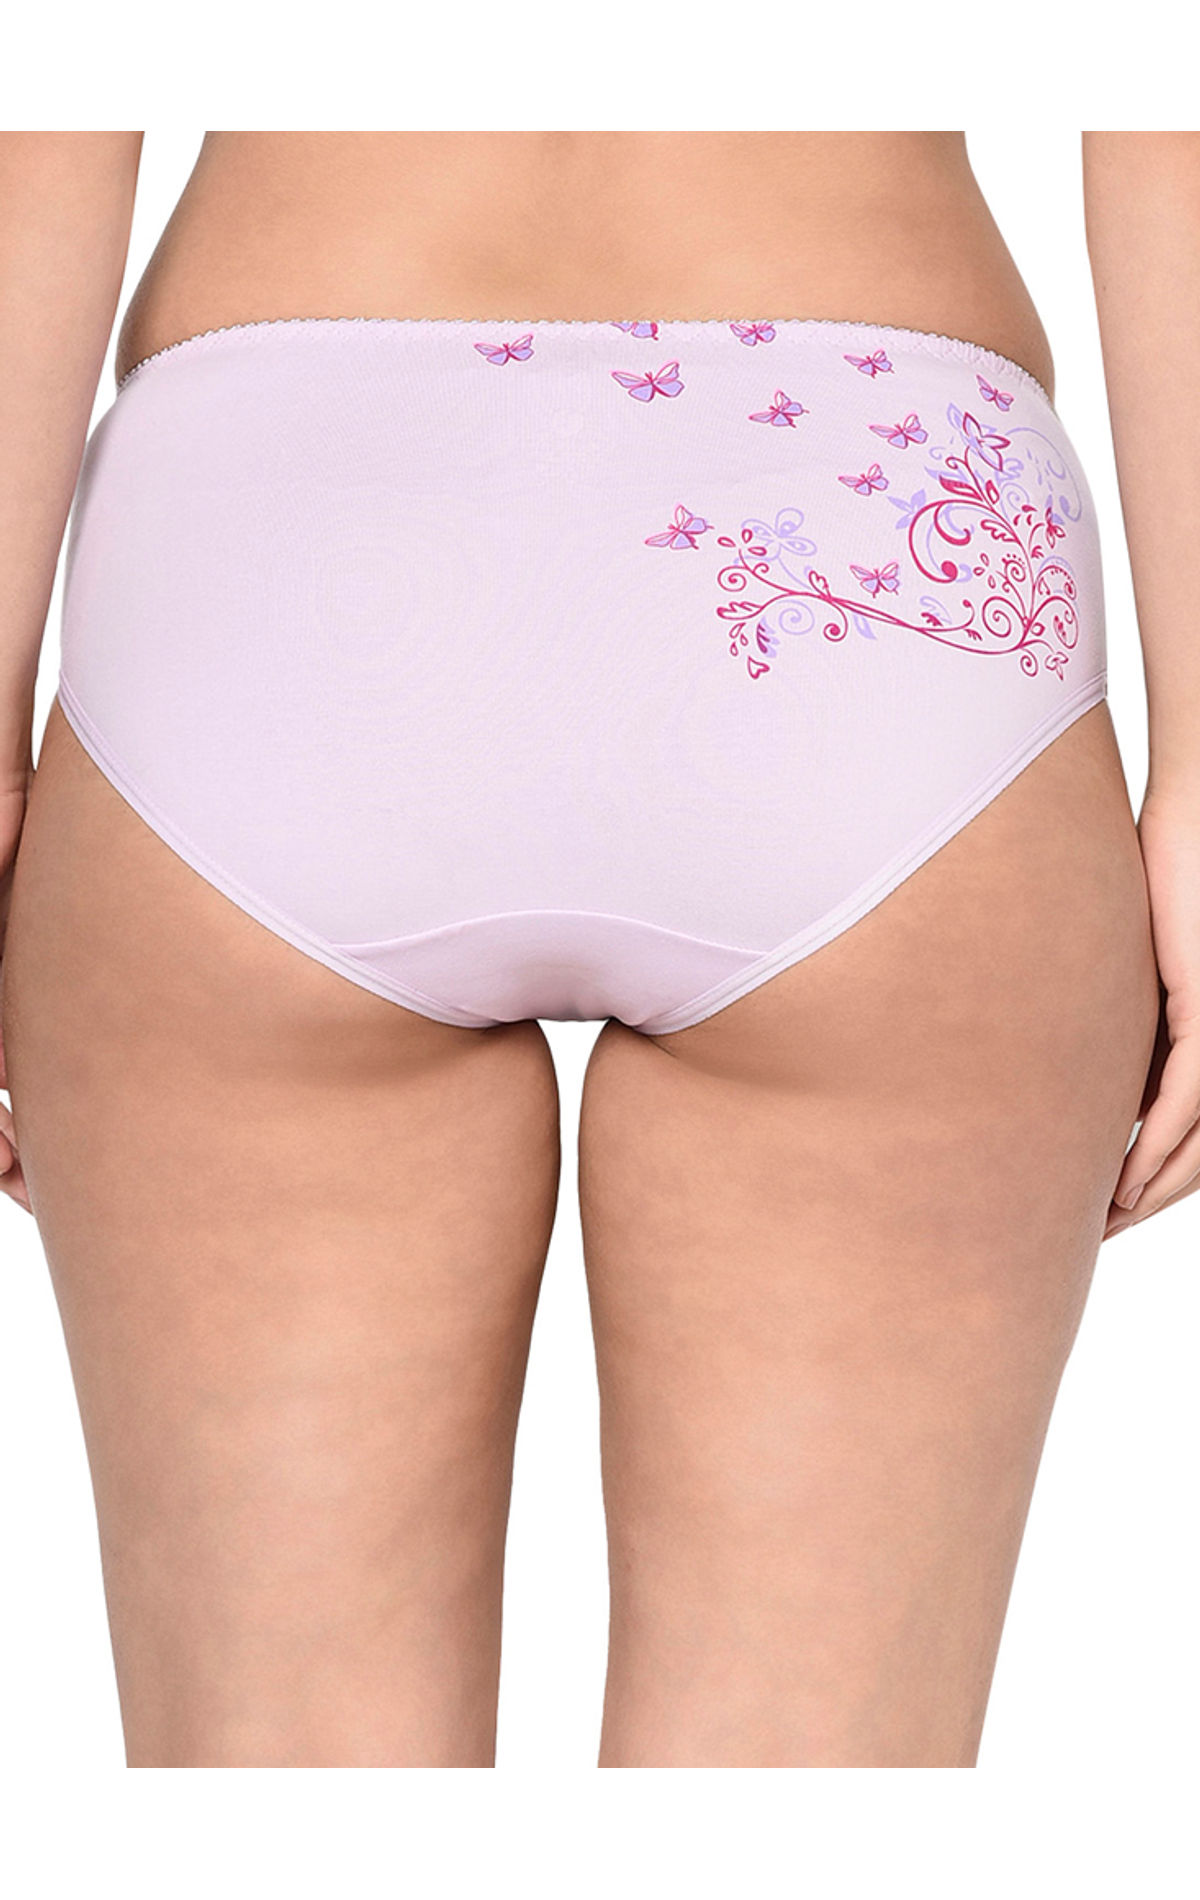 BODYCARE Printed Panty in Coimbatore - Dealers, Manufacturers & Suppliers -  Justdial